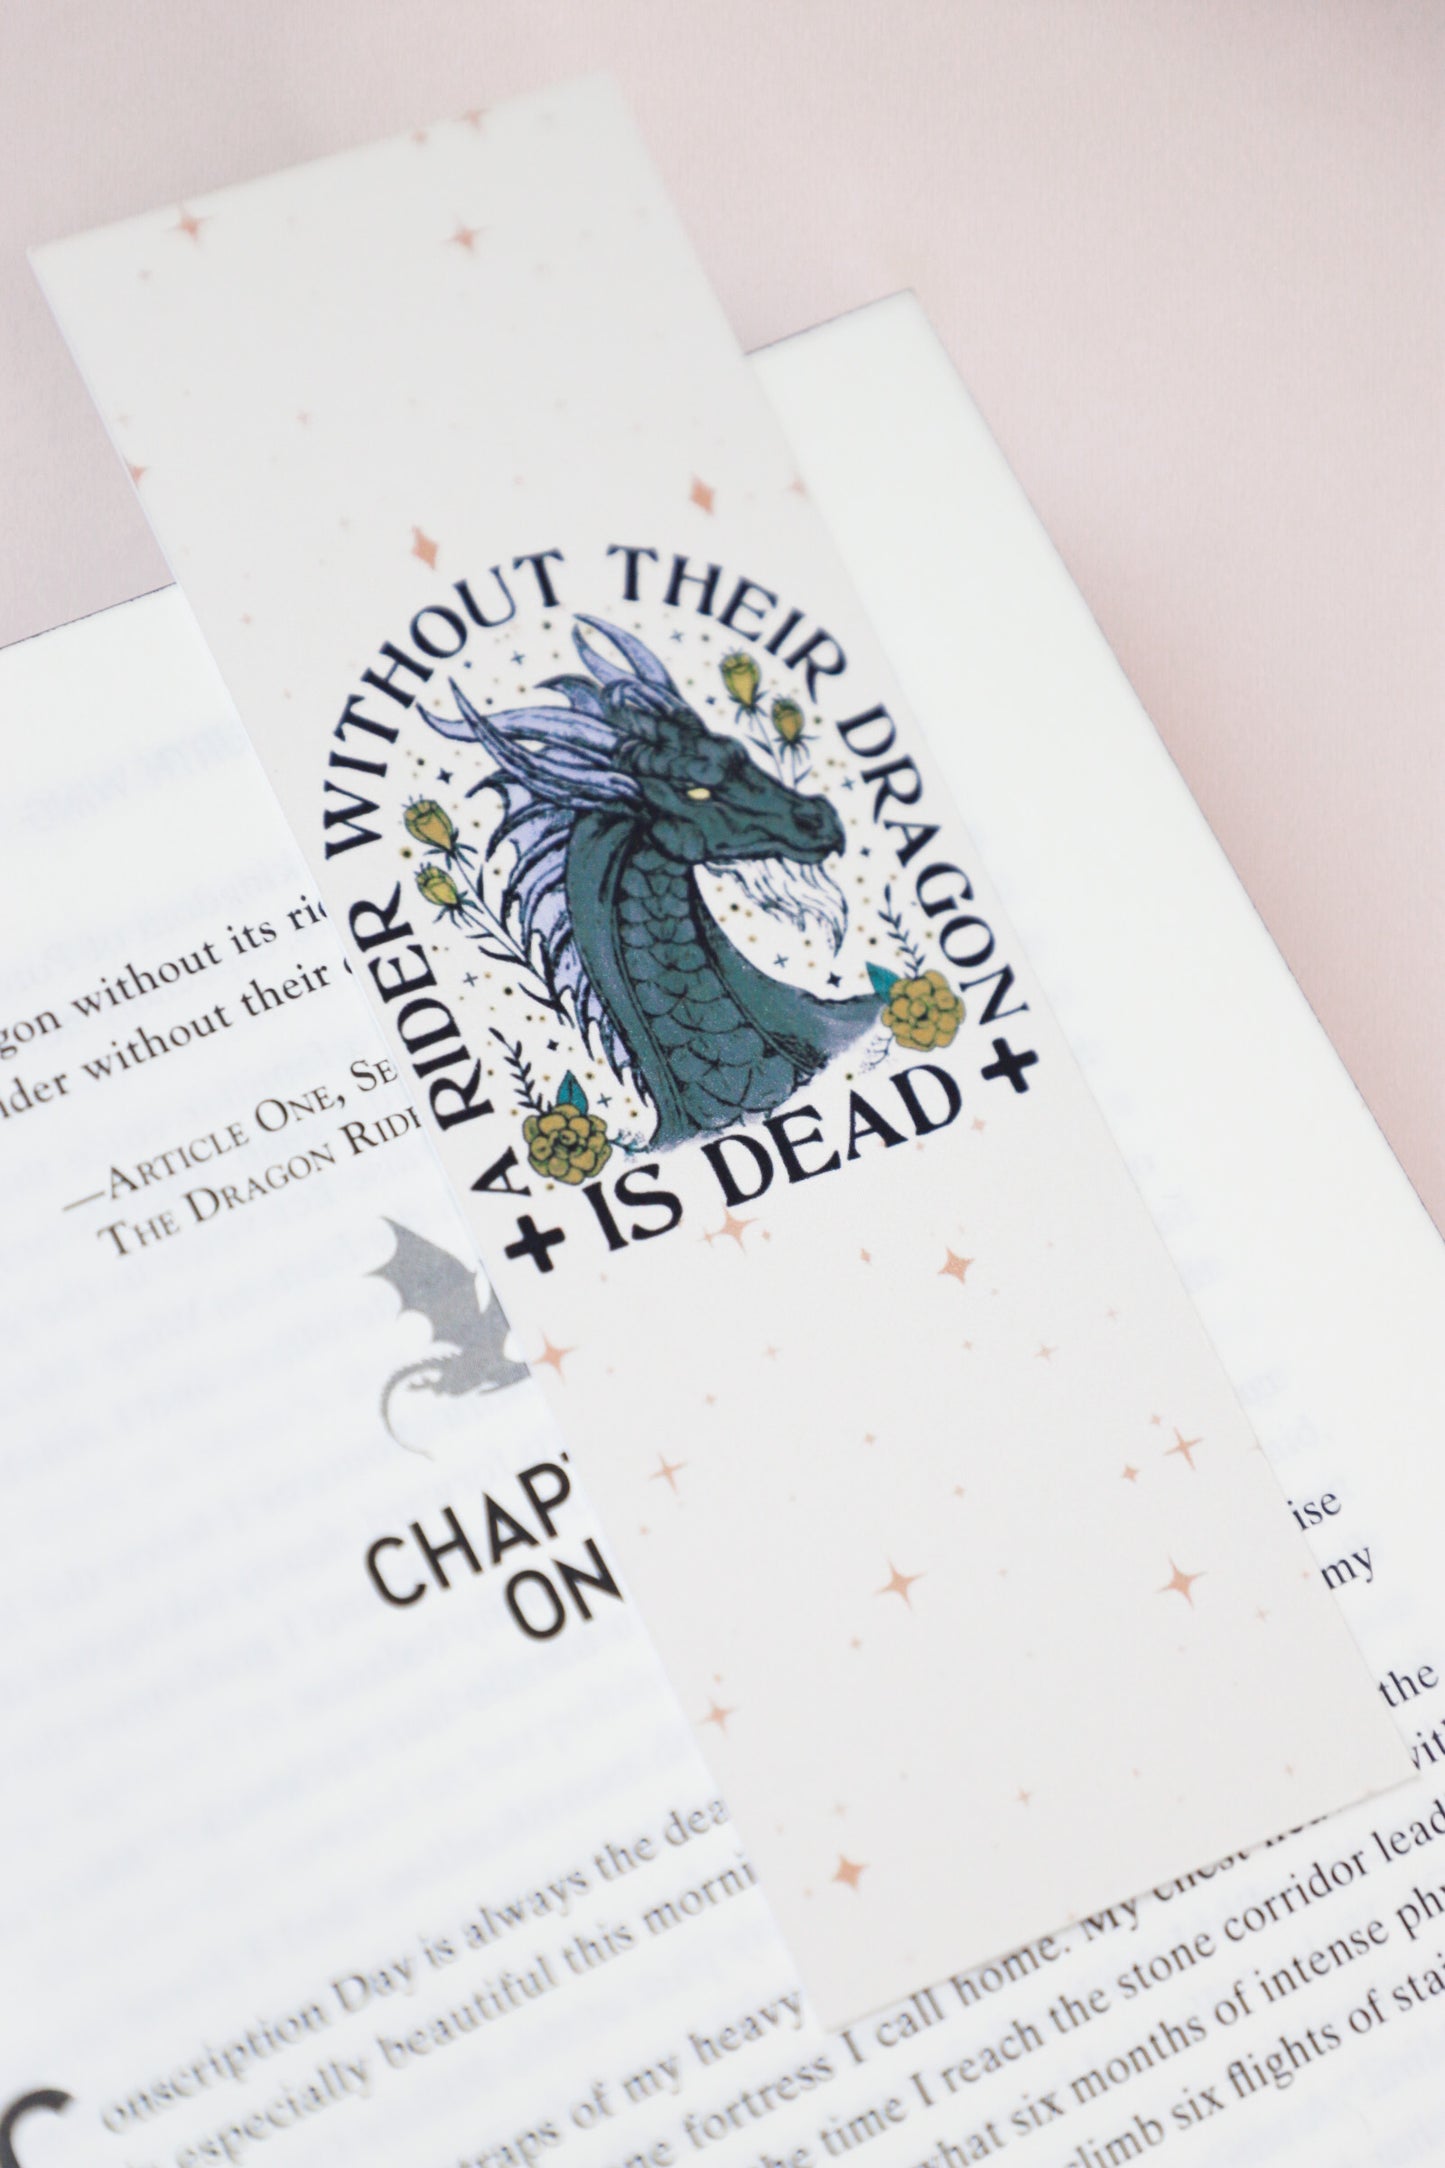 A Rider Without Their Dragon Is Dead Bookmark